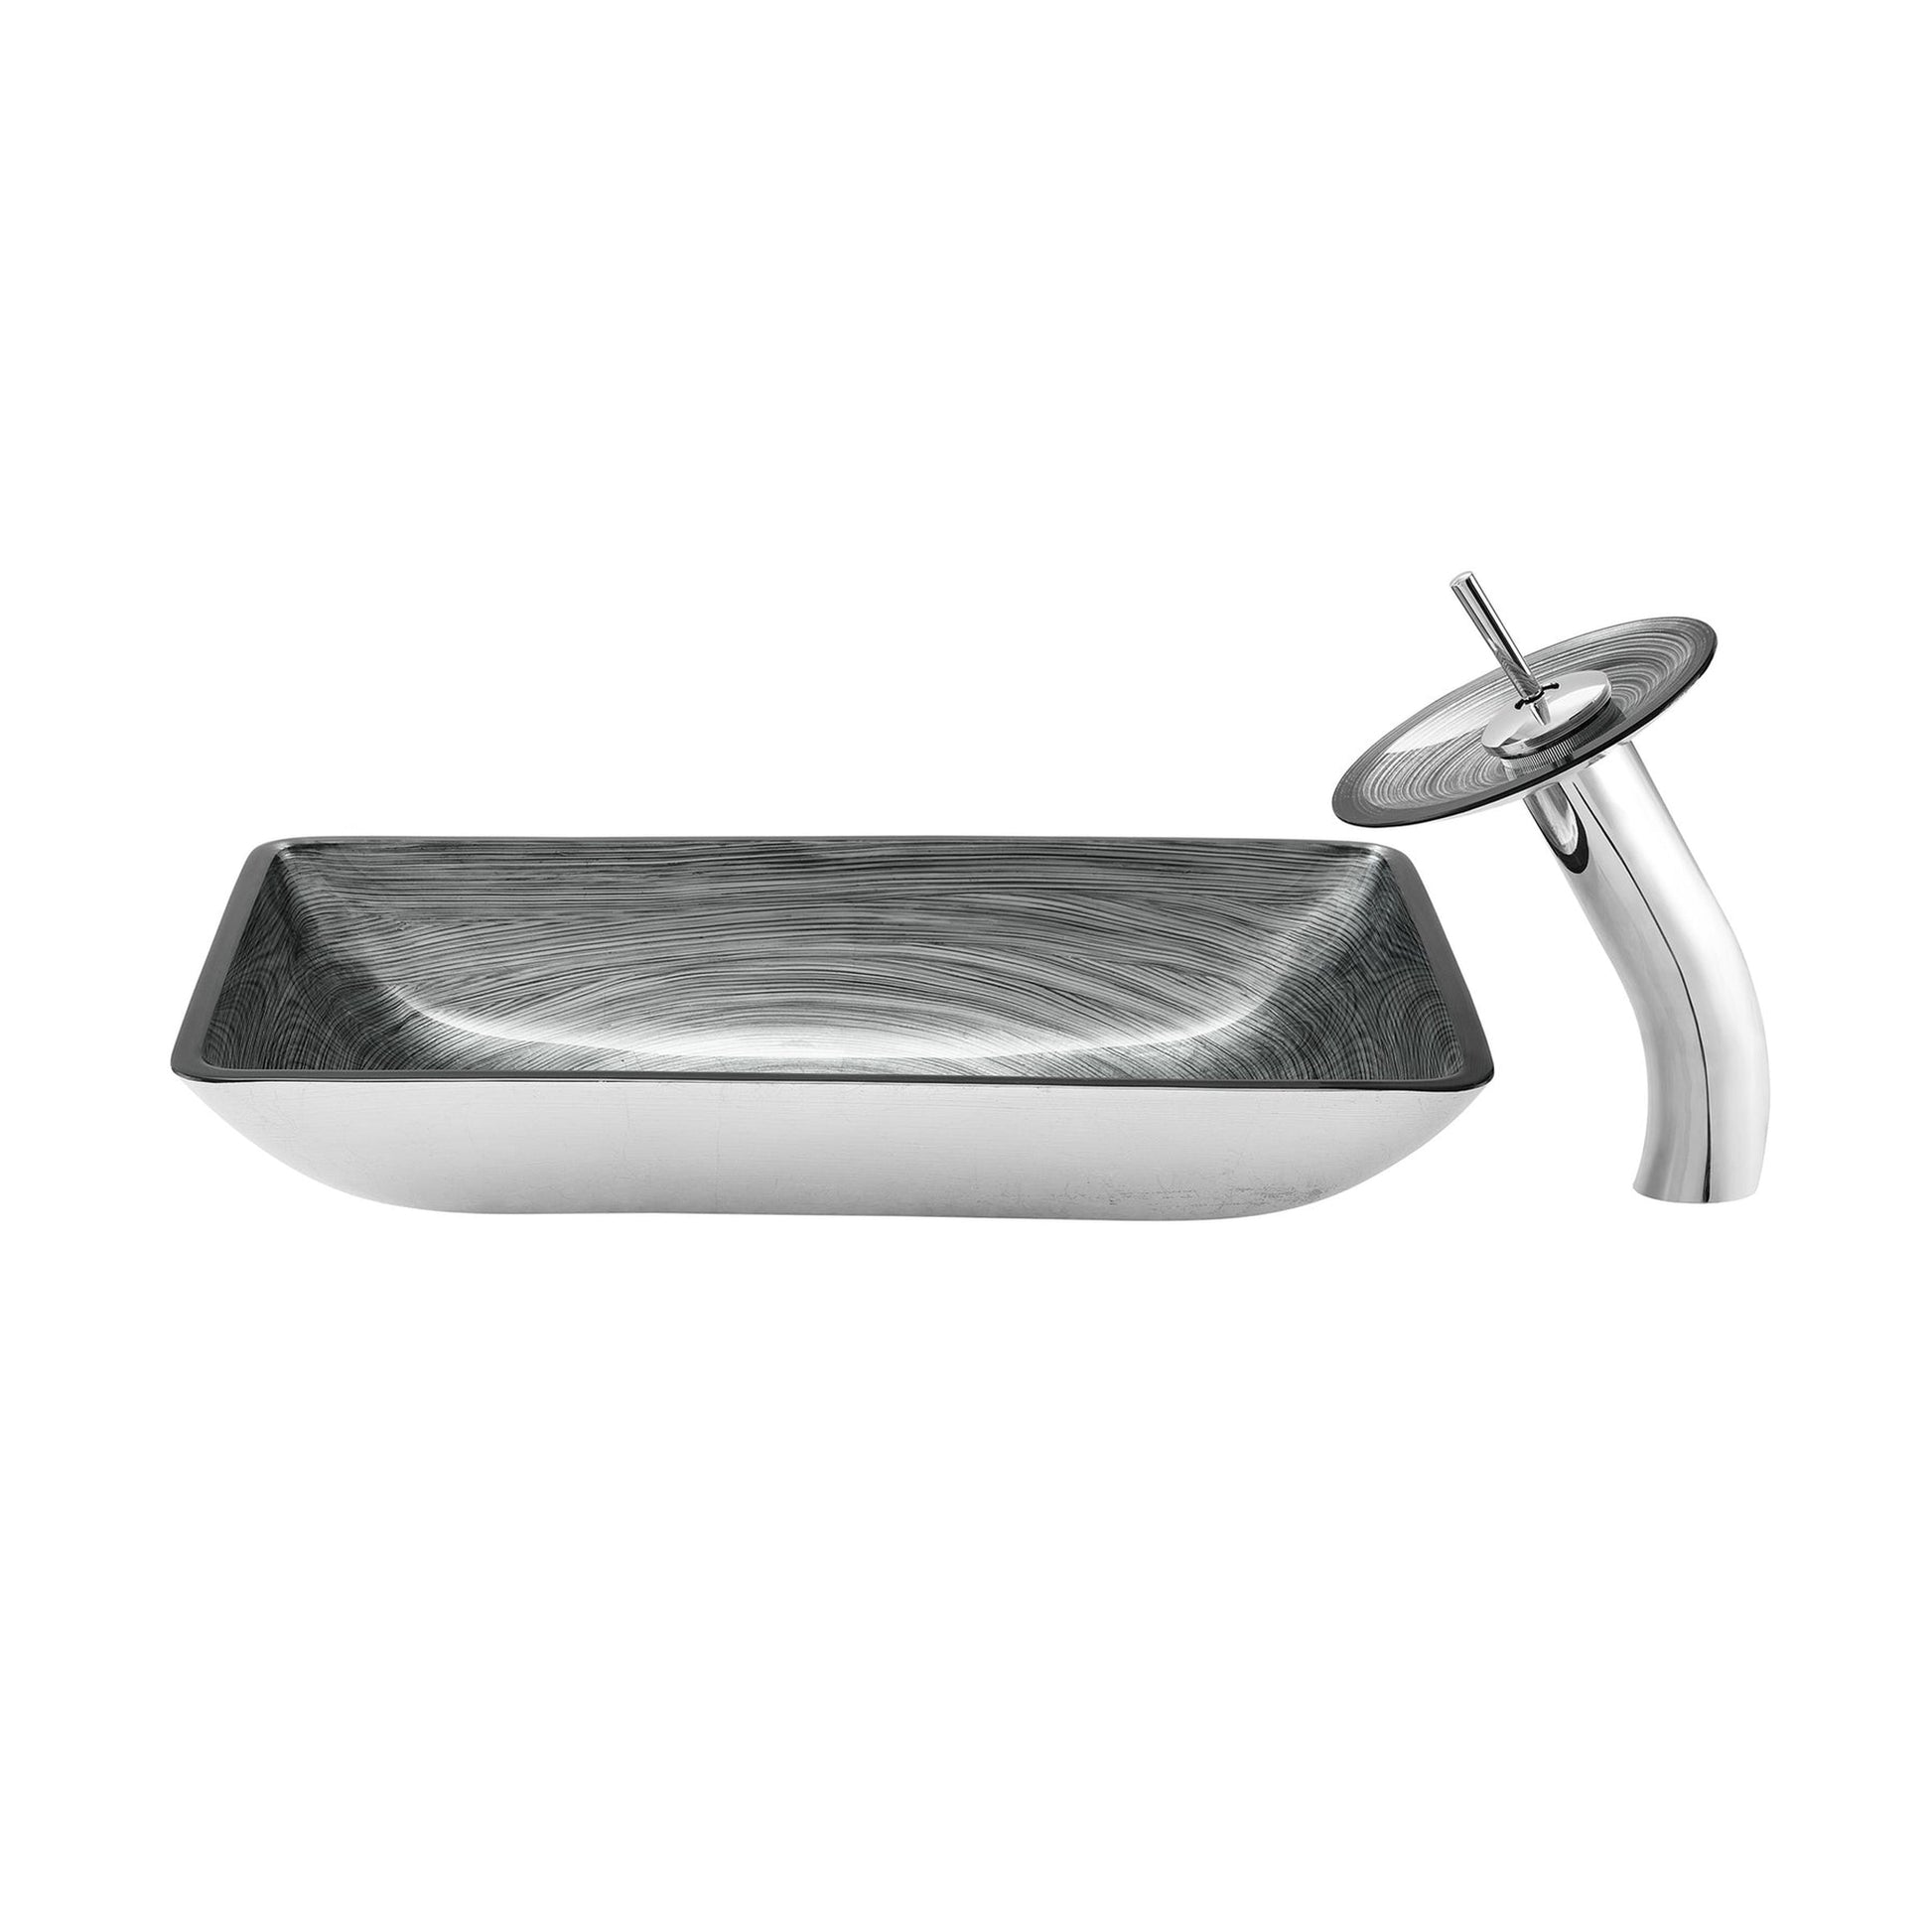 Swiss Madison Cascade 22" x 14" Smoky Gray Rectangular Tempered Glass Bathroom Vessel Sink With Waterfall Faucet